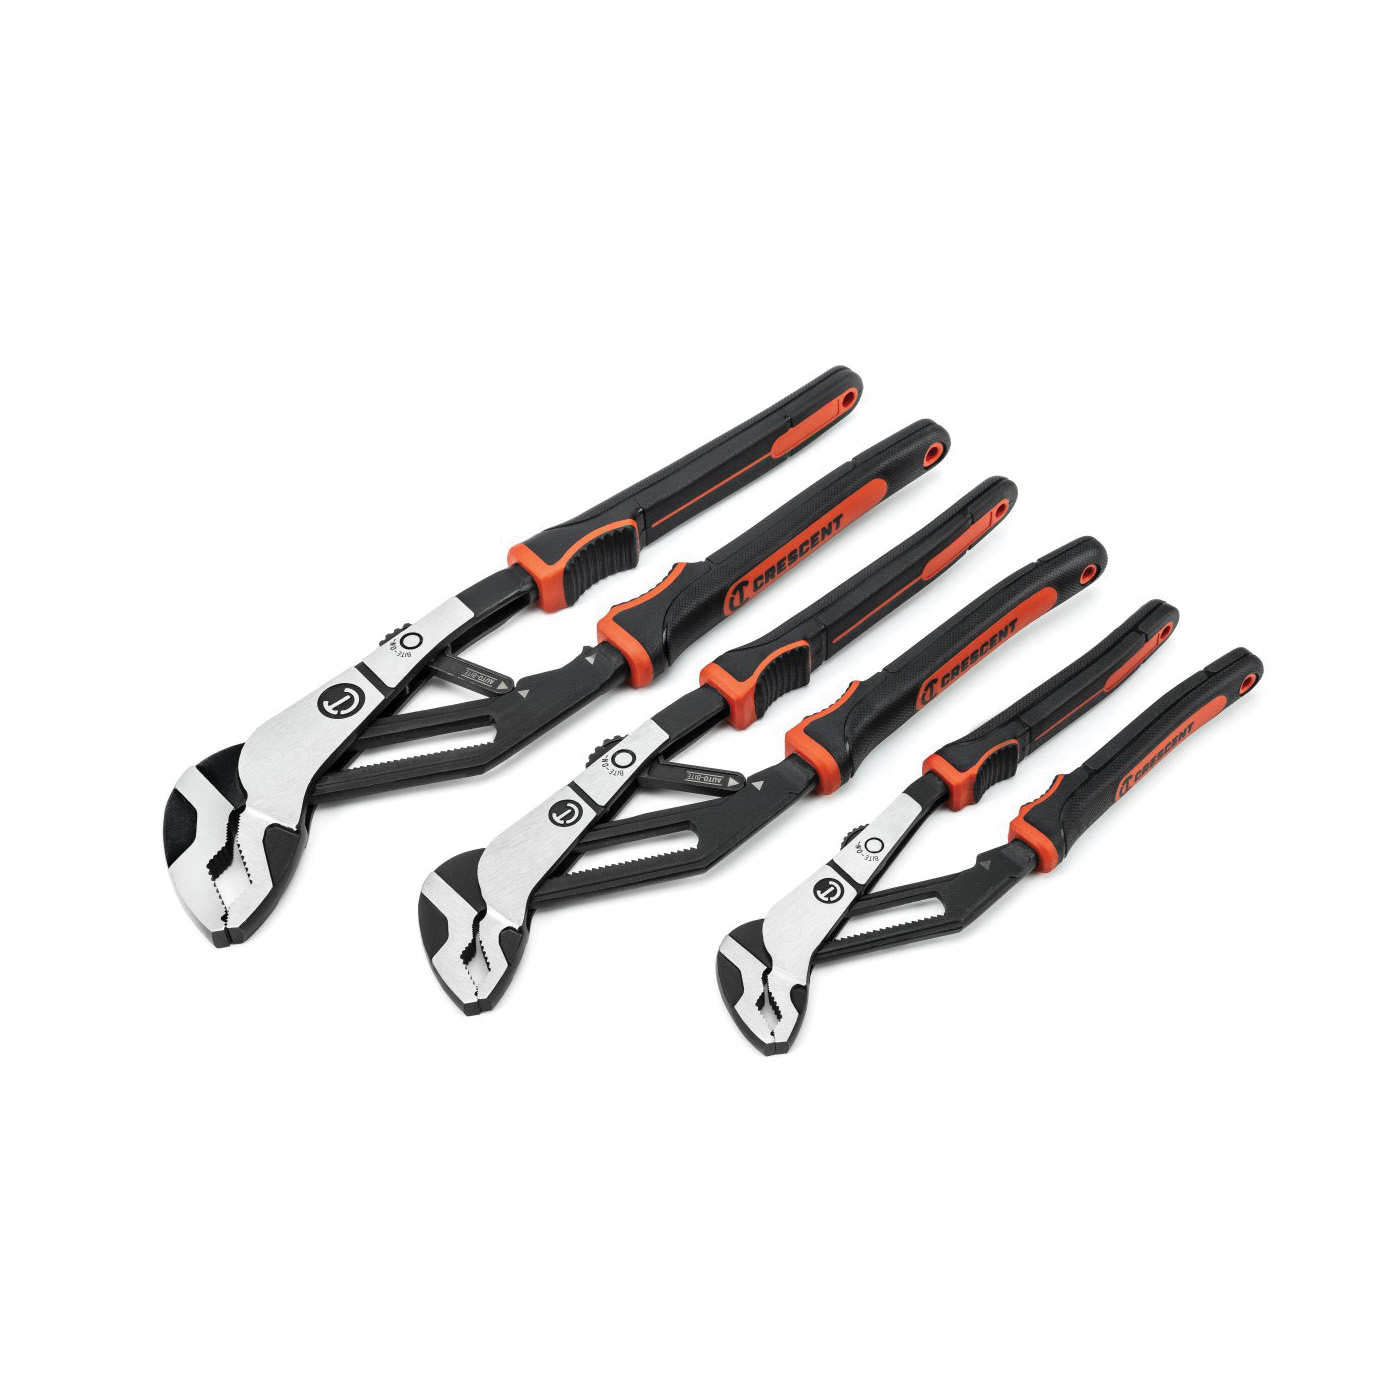 Crescent Z2 Auto-Bite Series RTABCGSET3 Tongue and Groove Plier Set, 3-Piece, Alloy Steel, Black/Rawhide, Polished